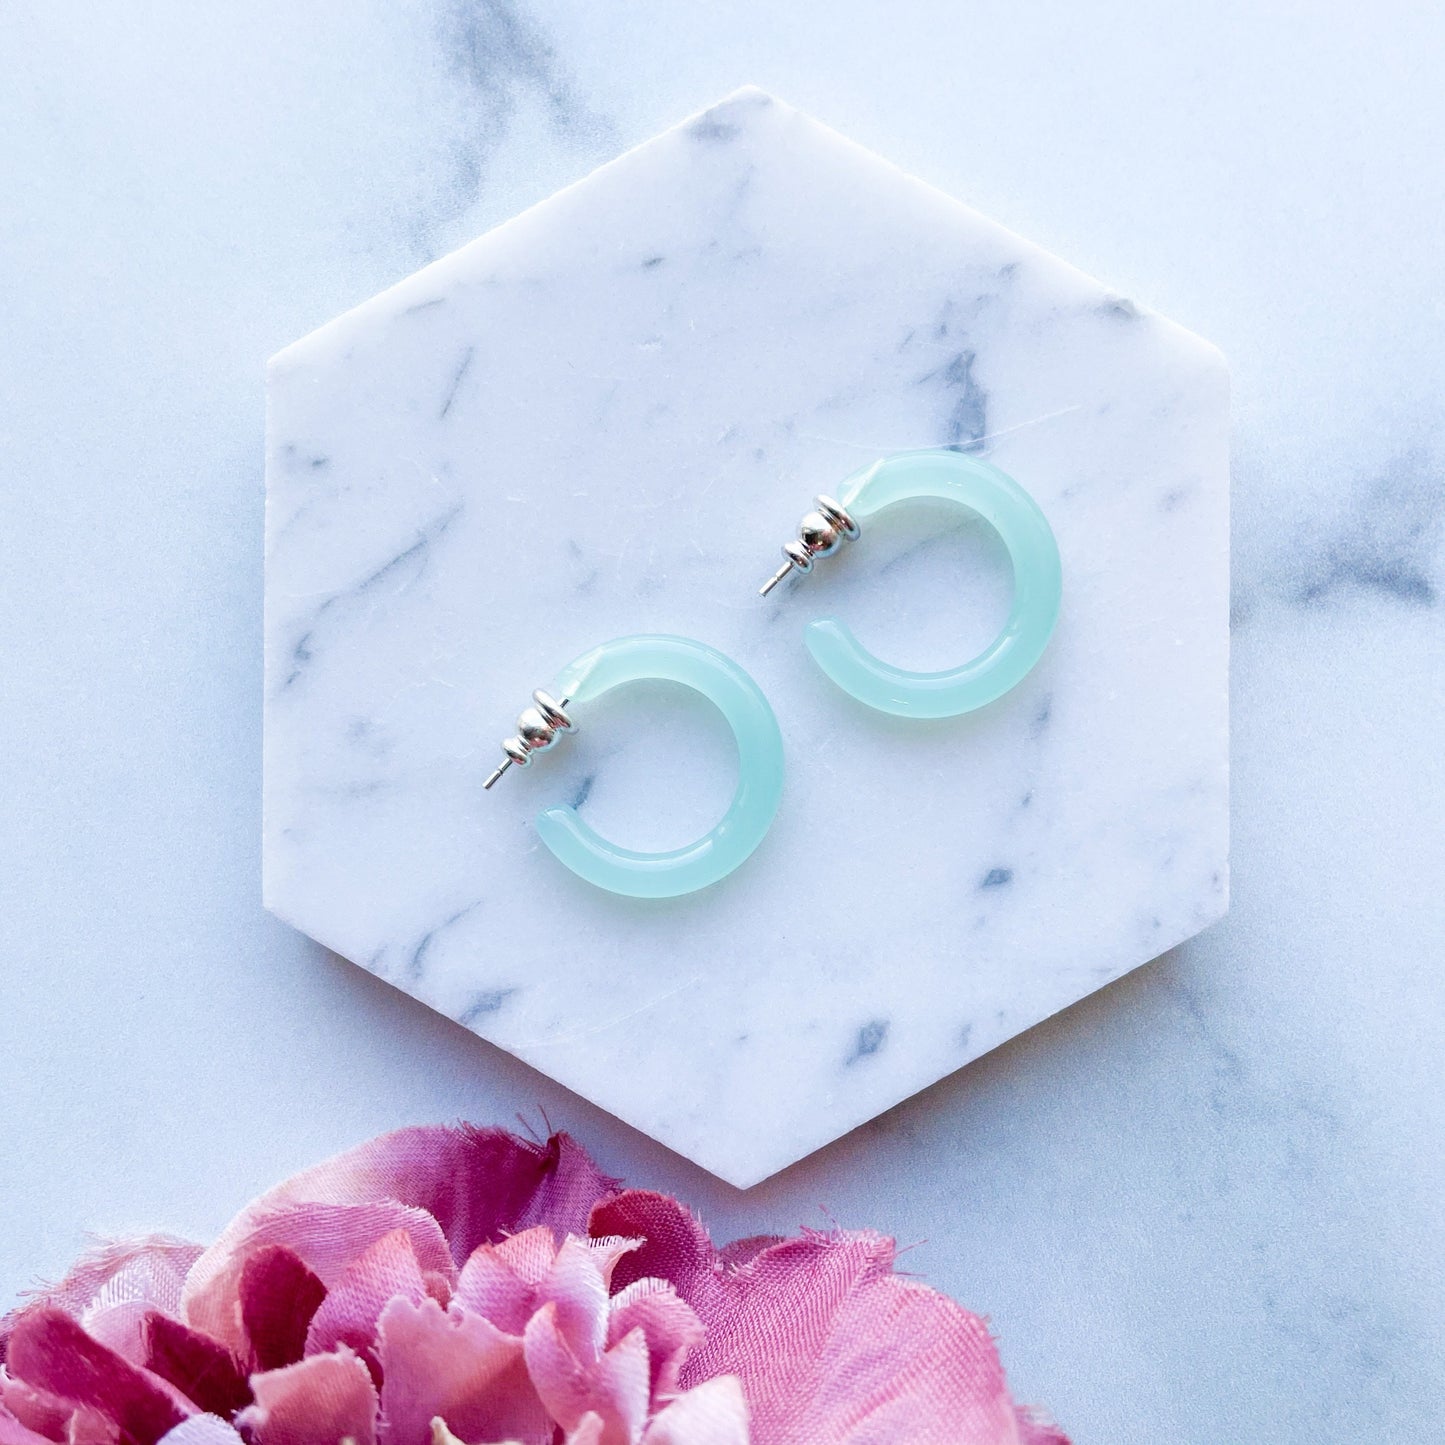 Ultra Mini Hoops in Jade | Small Jade Hoops Acetate Resin 925 Sterling Silver Posts Minimalist Gift For Her Dainty